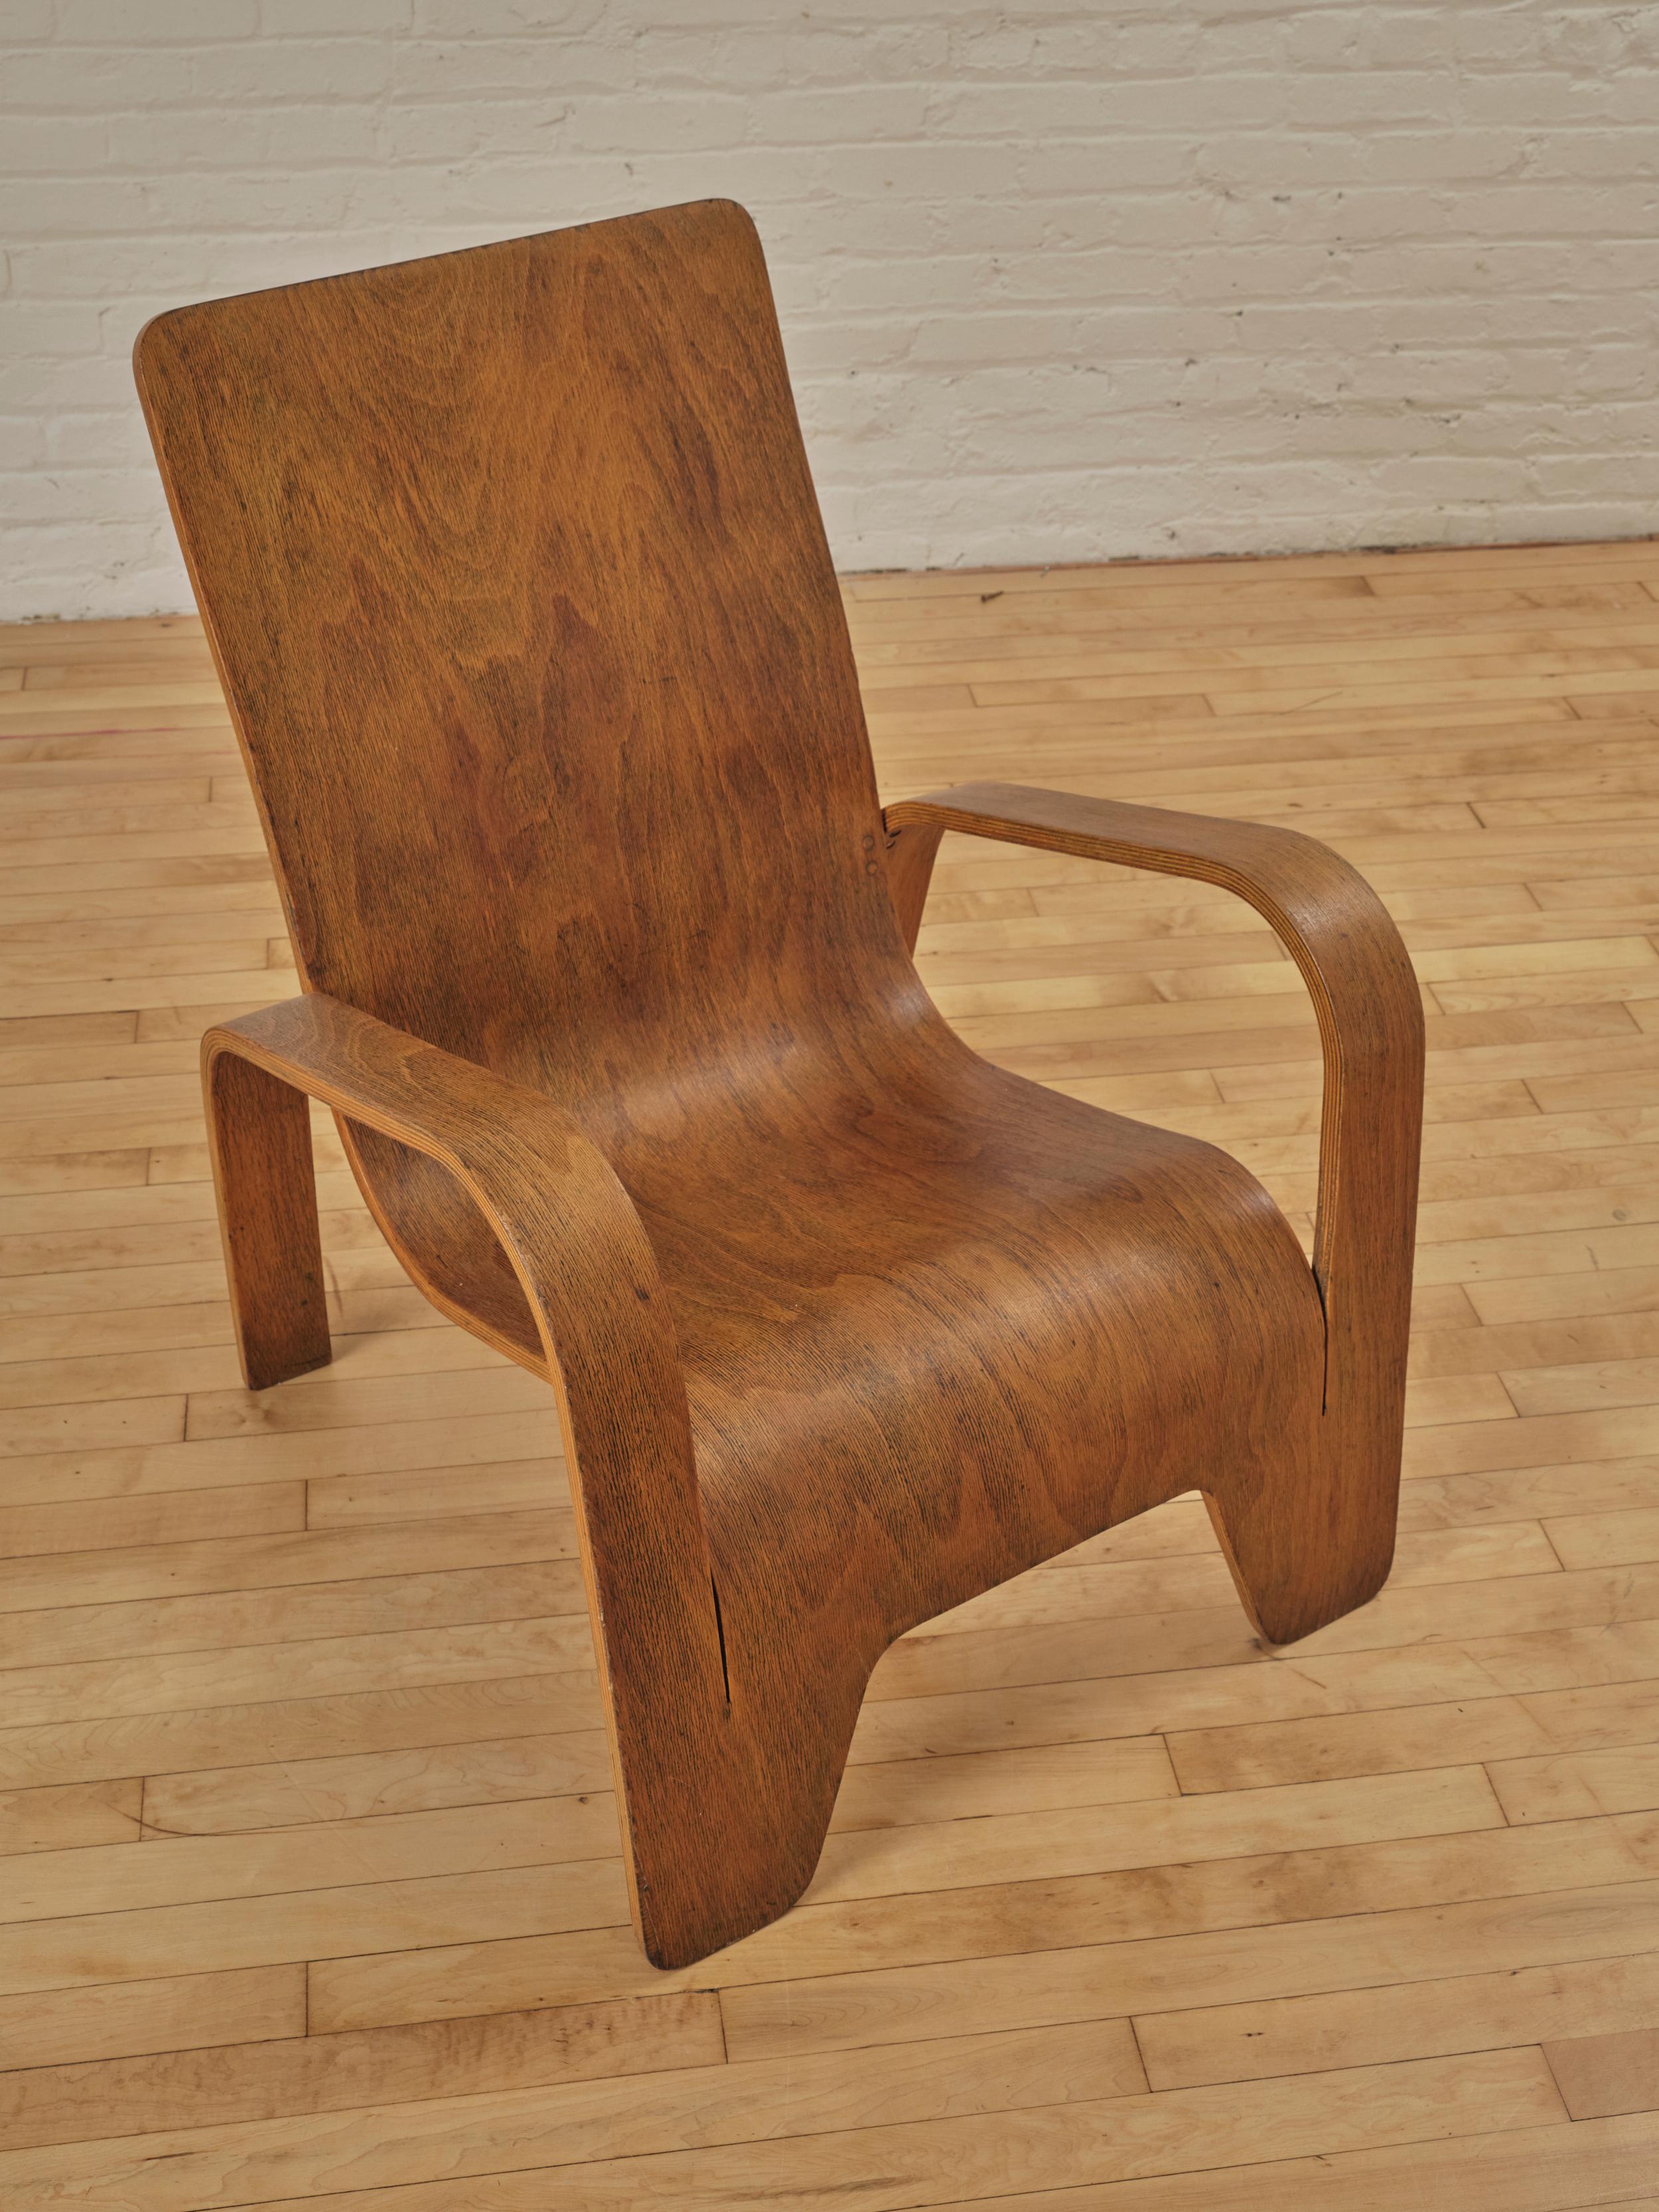  LaWo1 Wooden Lounge Chair by Han Pieck for Lawo Ommen For Sale 1